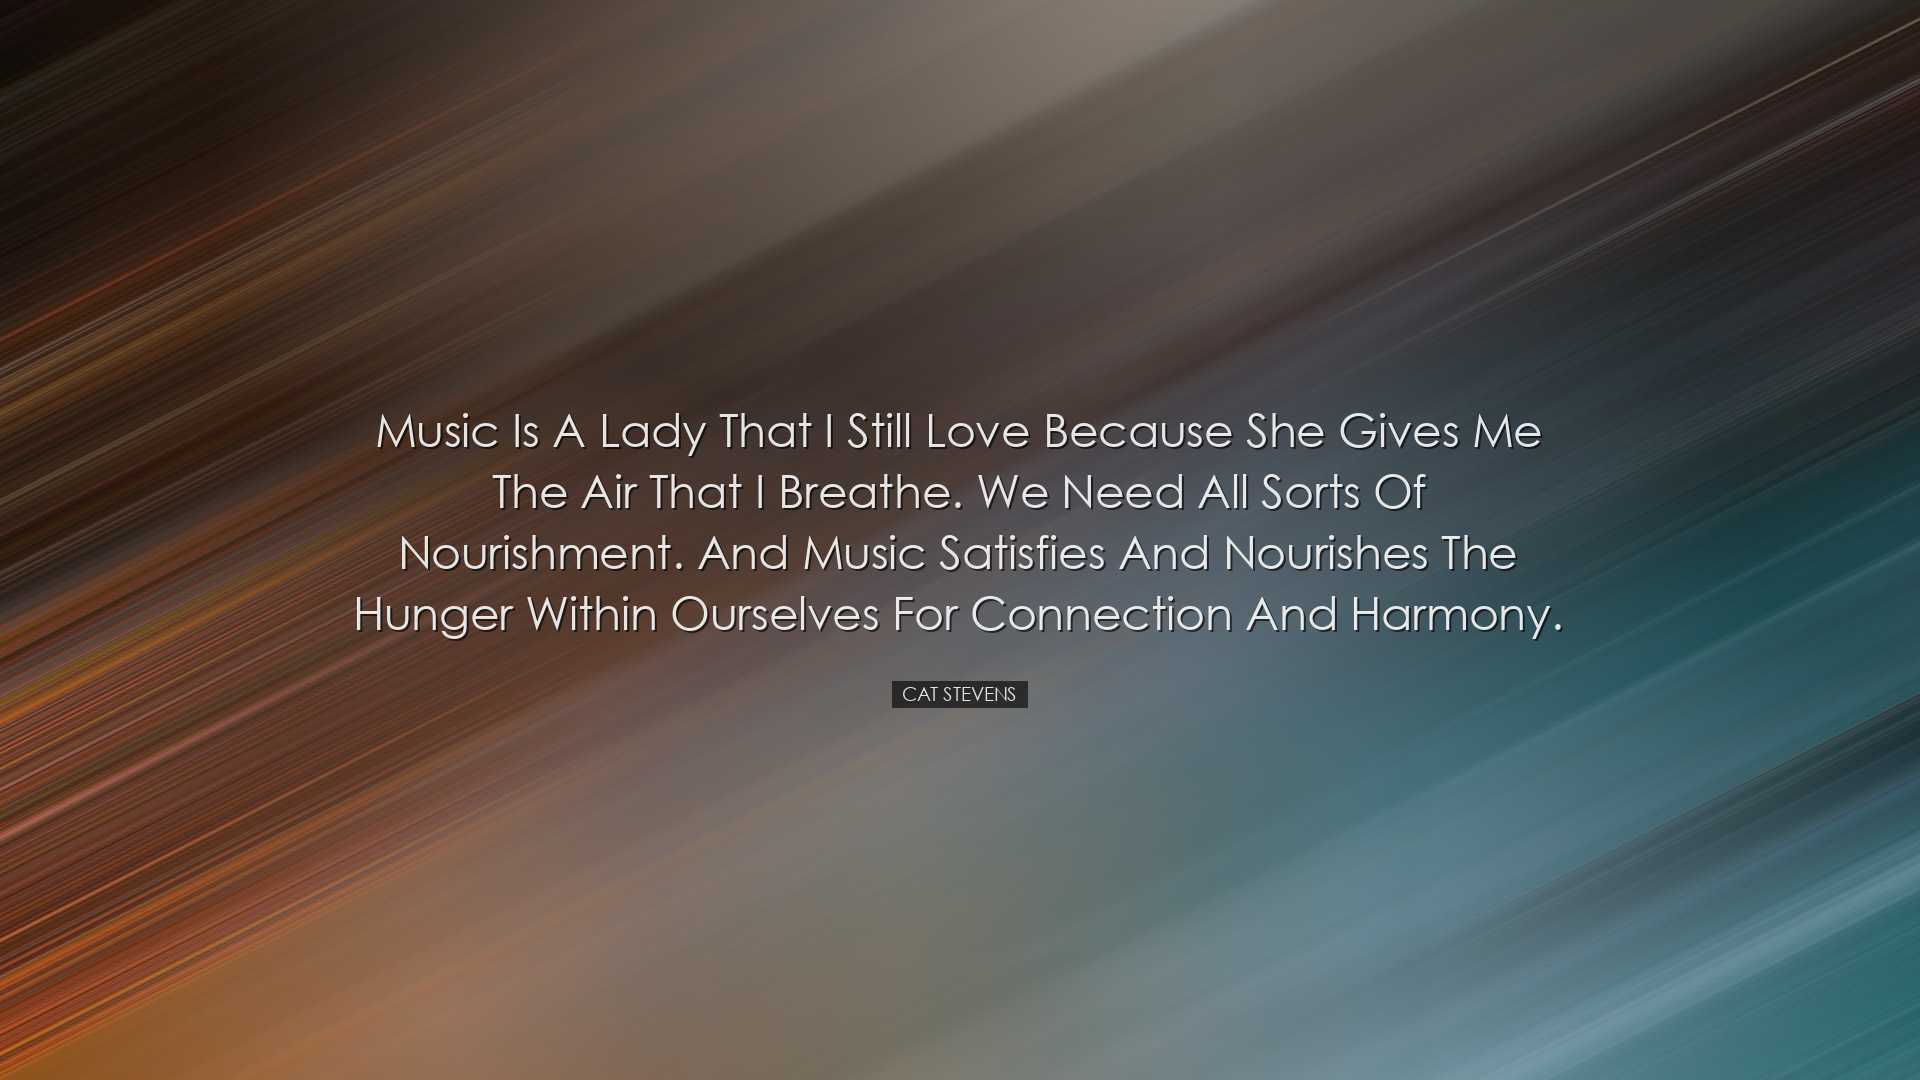 Music is a lady that I still love because she gives me the air tha